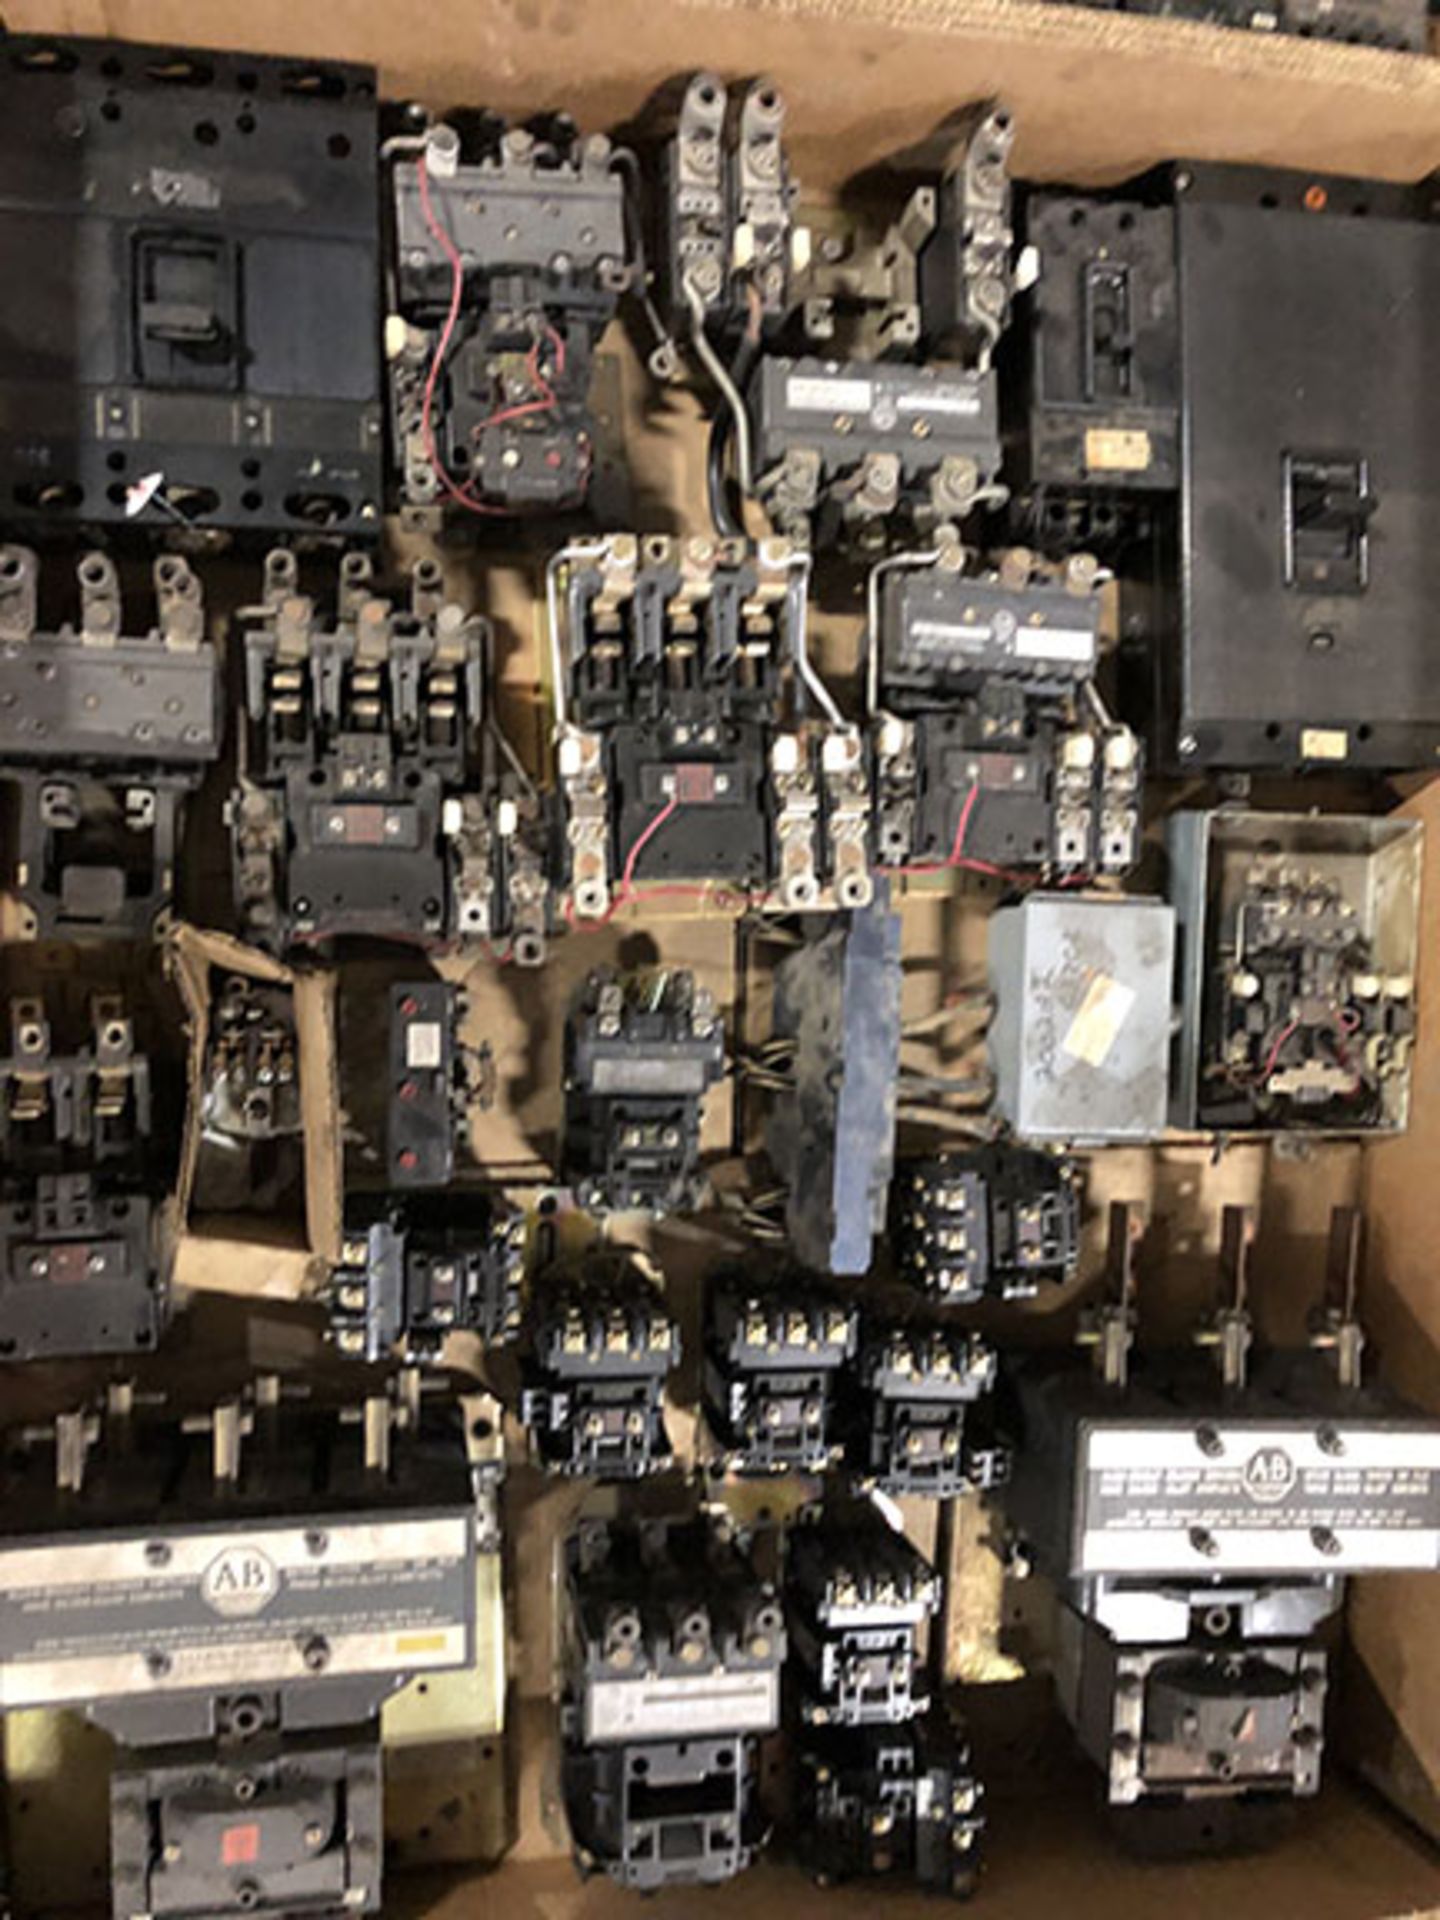 (2) SKIDS OF ASSORTED SWITCHES, BREAKERS, AND AMPS